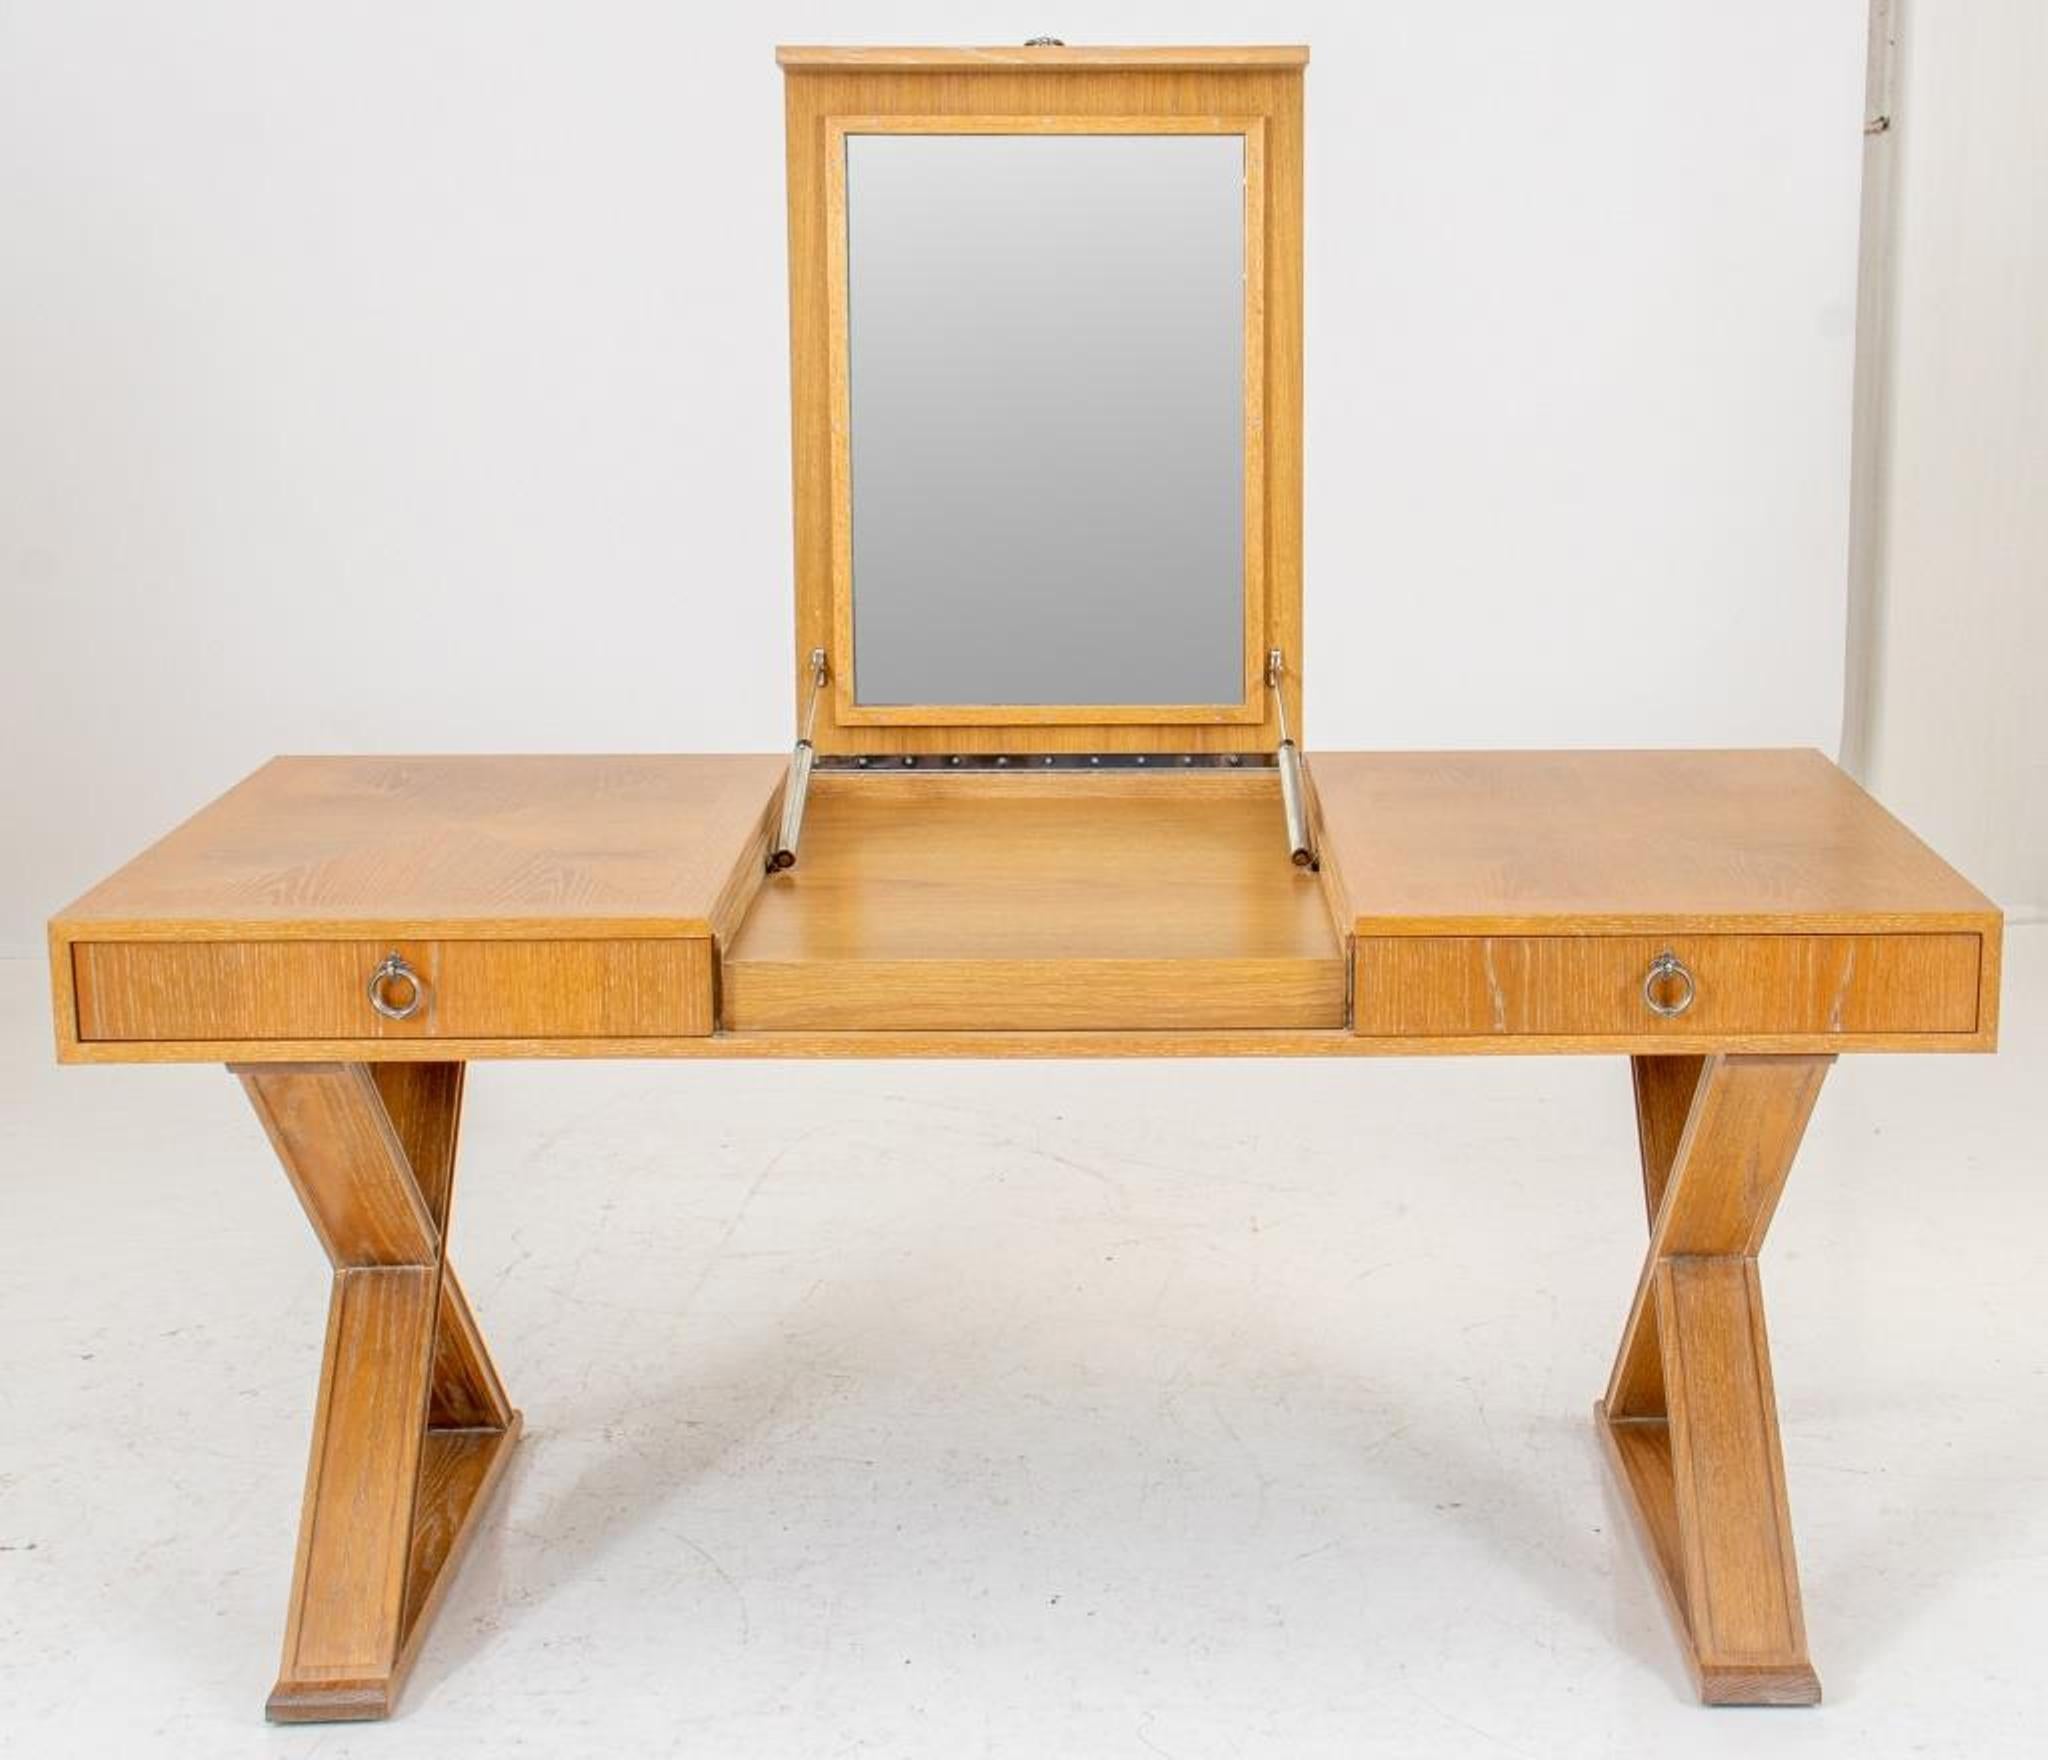 Jean Michel Frank (French 1895 -1941) style large cerused oak dressing table, the rectangular parquetry top opening to reveal a center dressing cavity fitted with mirror flanked by two short drawers each with silvered bronze ring pulls, supported by